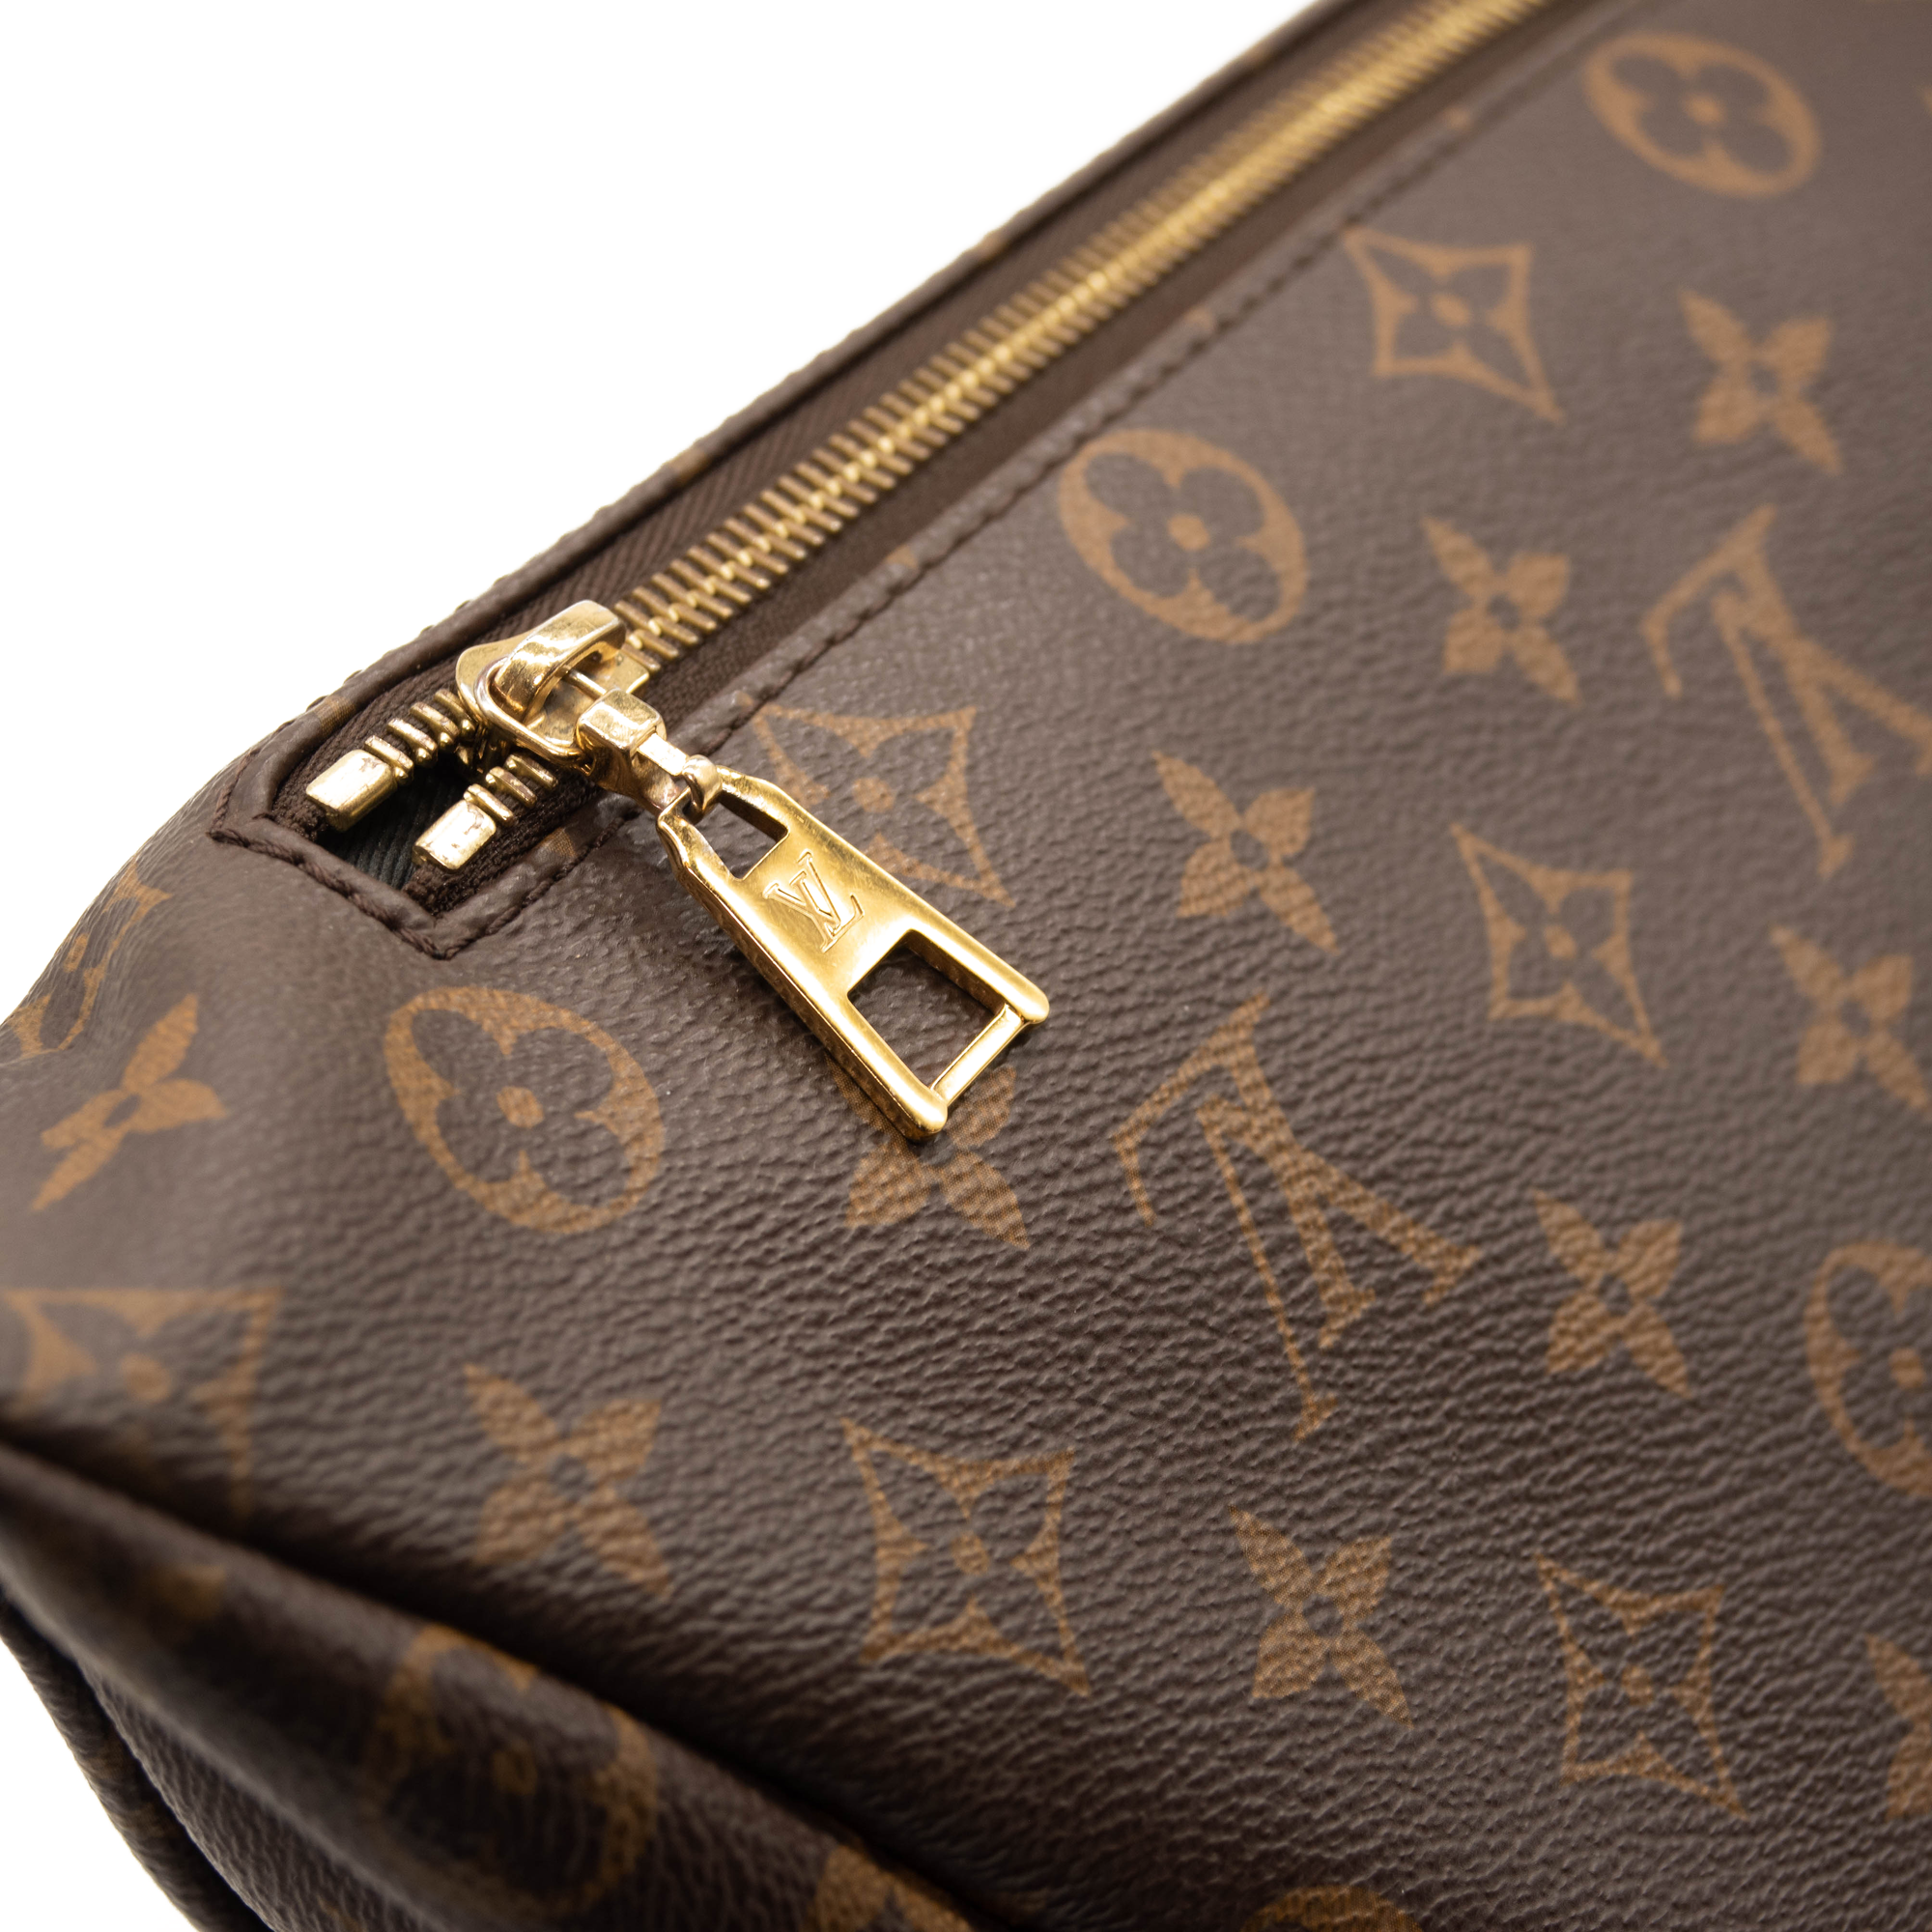 used Louis Vuitton Pouch Handbags